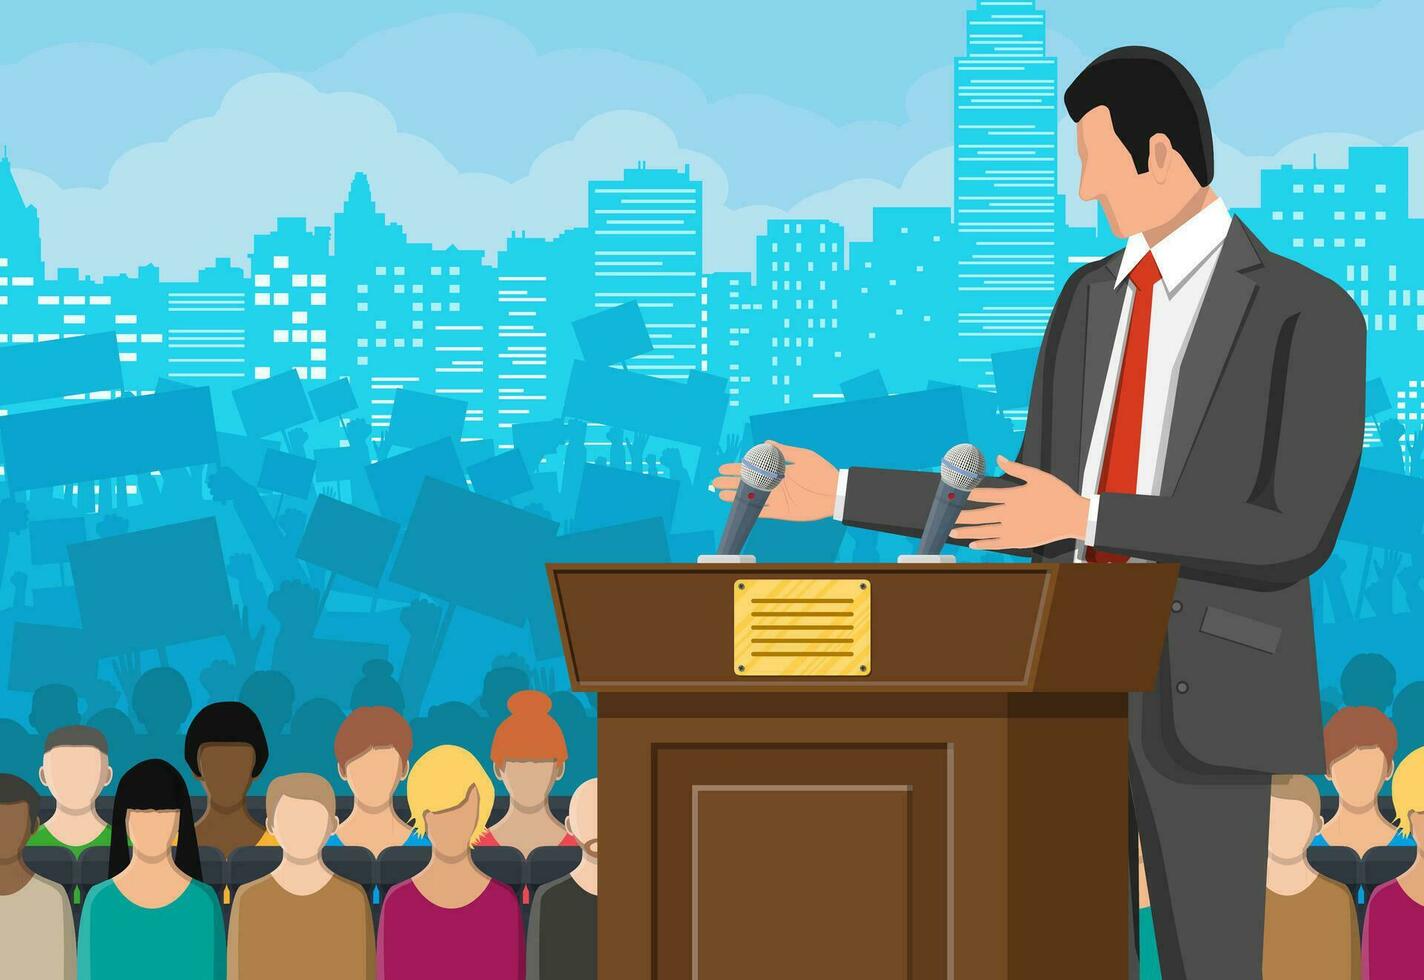 Orator speaking from tribune. Public speaker. Wooden rostrum with microphones for presentation. Stand, podium for conferences, lectures debates. Crowd, demonstrators, protest. Flat vector illustration